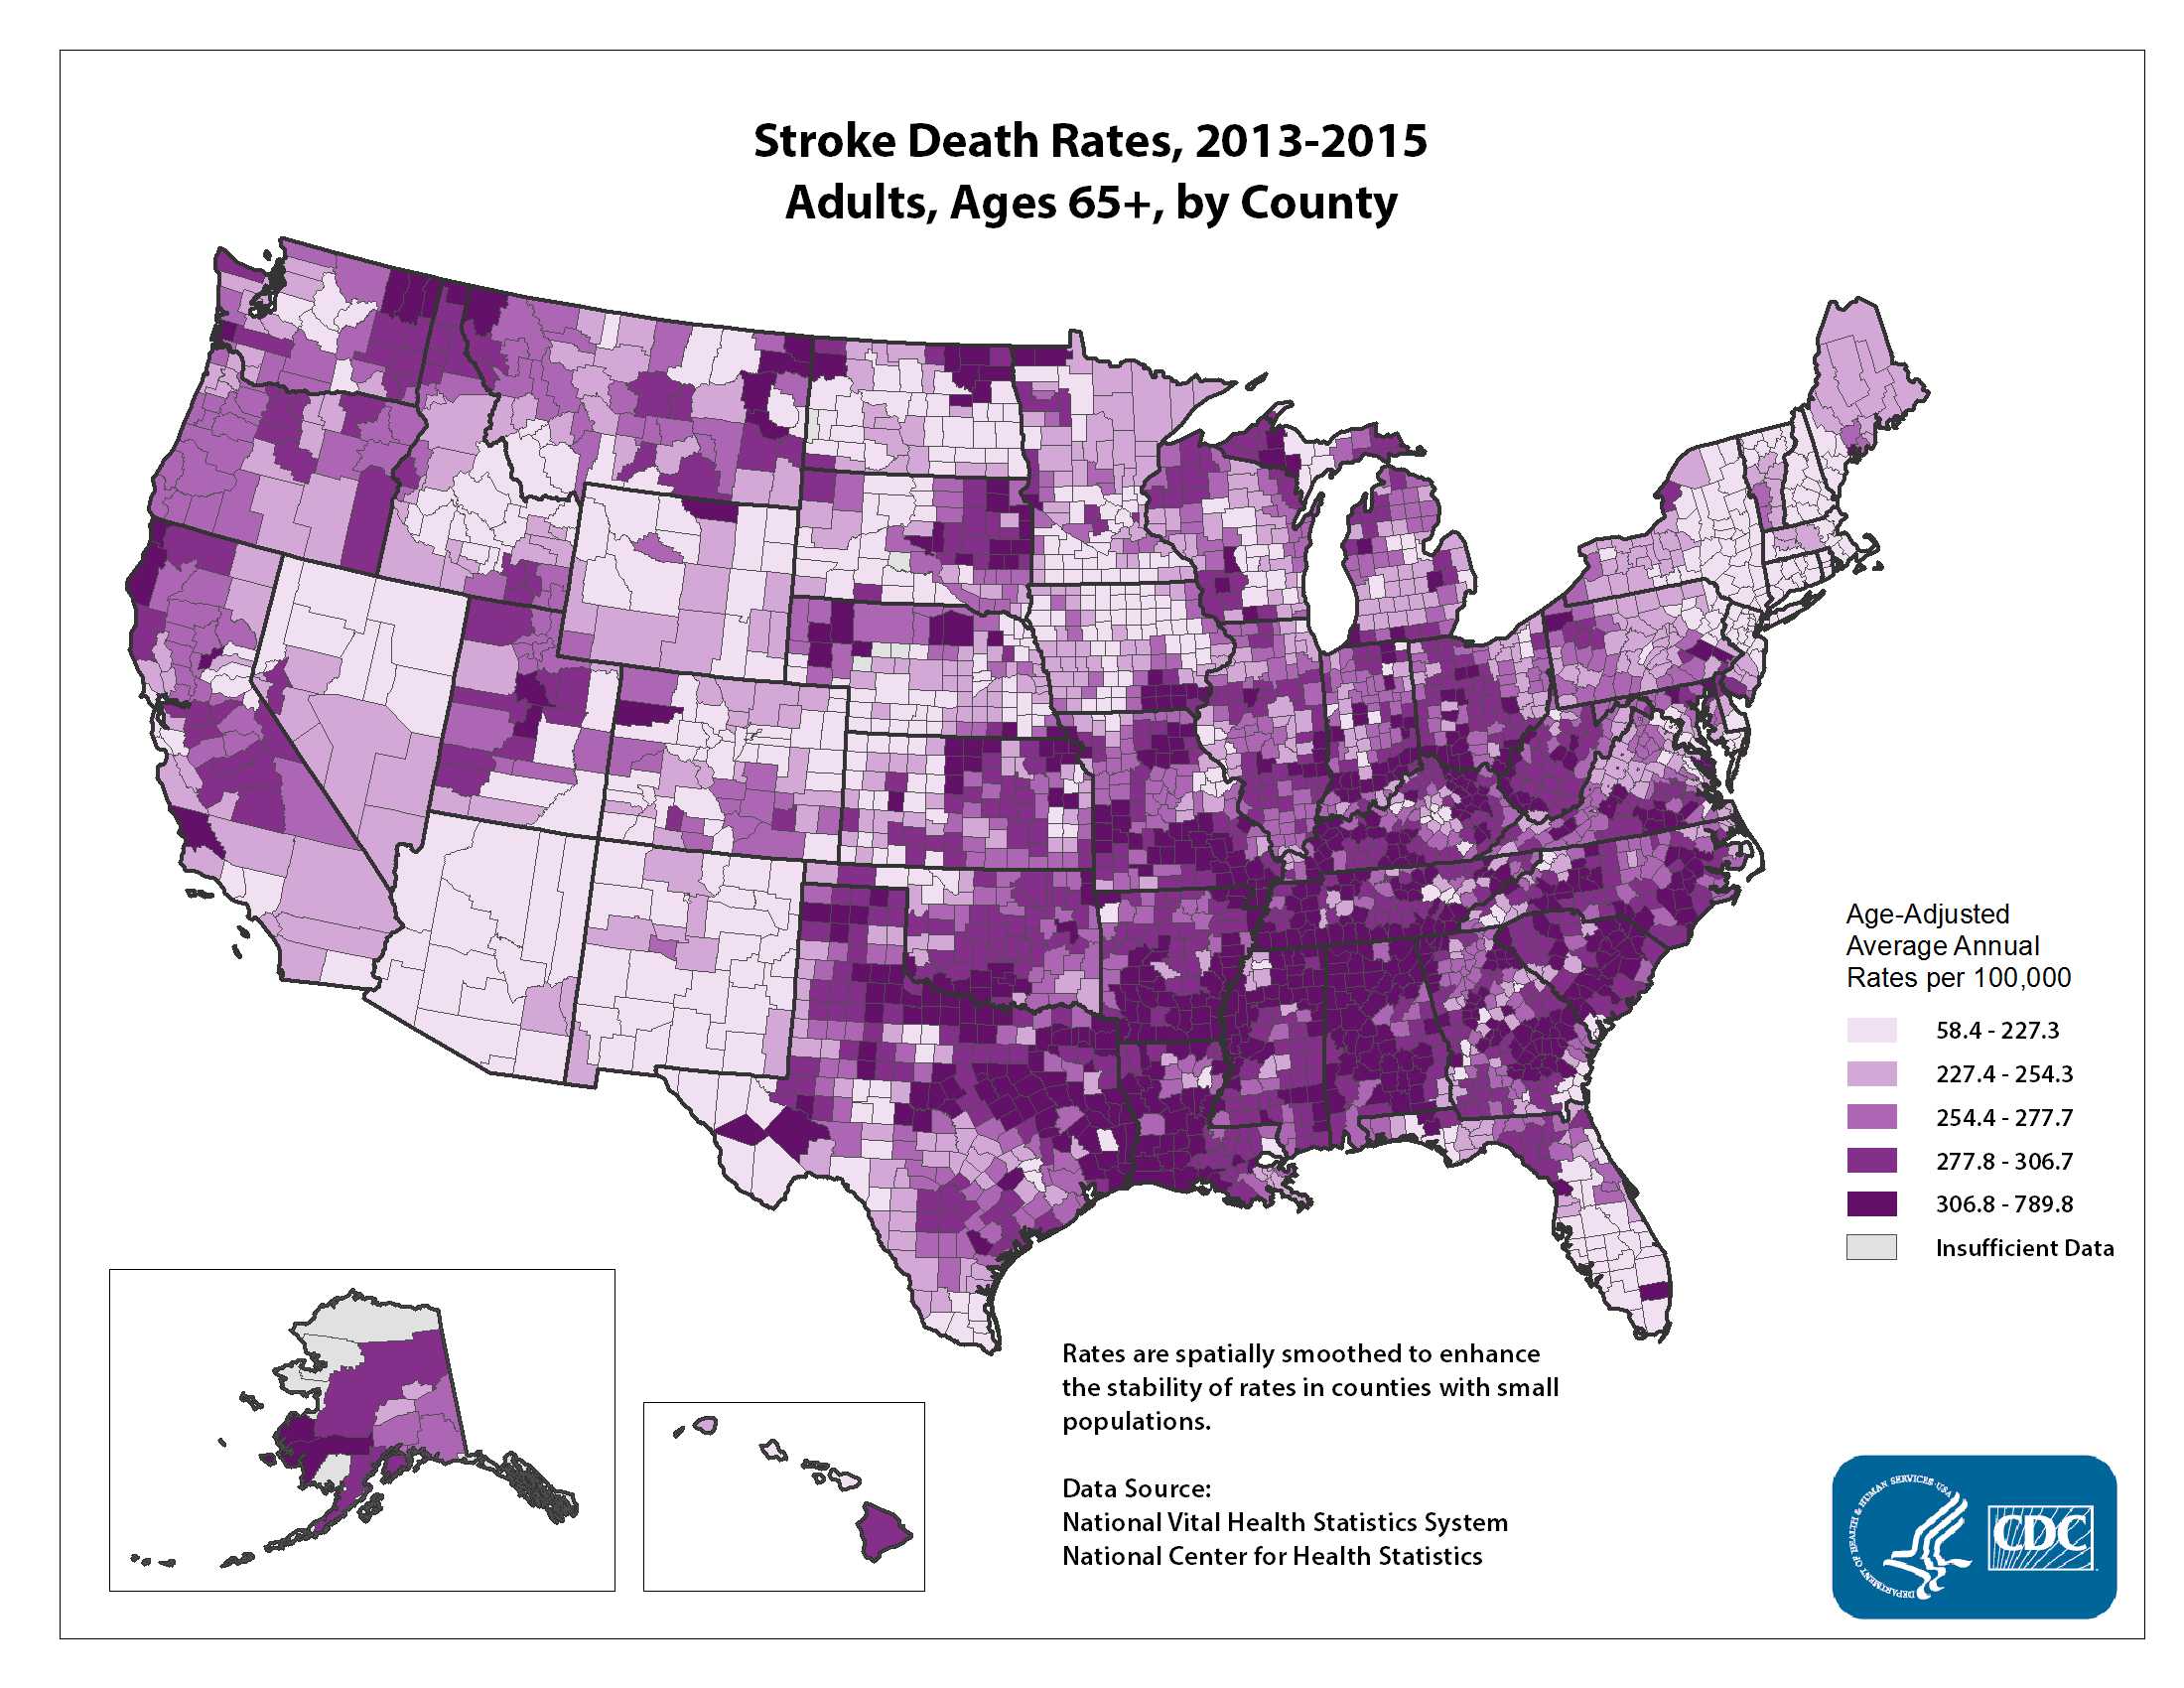 Stroke Death Rates for 2012 through 2014 for Adults Aged 65 Years and Older by County. The map shows that concentrations of counties with the highest stroke death rates - meaning the top quintile - are located primarily in the Southeast, with heavy concentrations of high-rate counties in Arkansas, Kentucky, West Virginia, Alabama, and South Carolina. Pockets of high-rate counties also are found in Oklahoma, parts of Texas, North Carolina, Tennessee, Utah, North Dakota, South Dakota, Kansas, Montana, California, and Alaska.